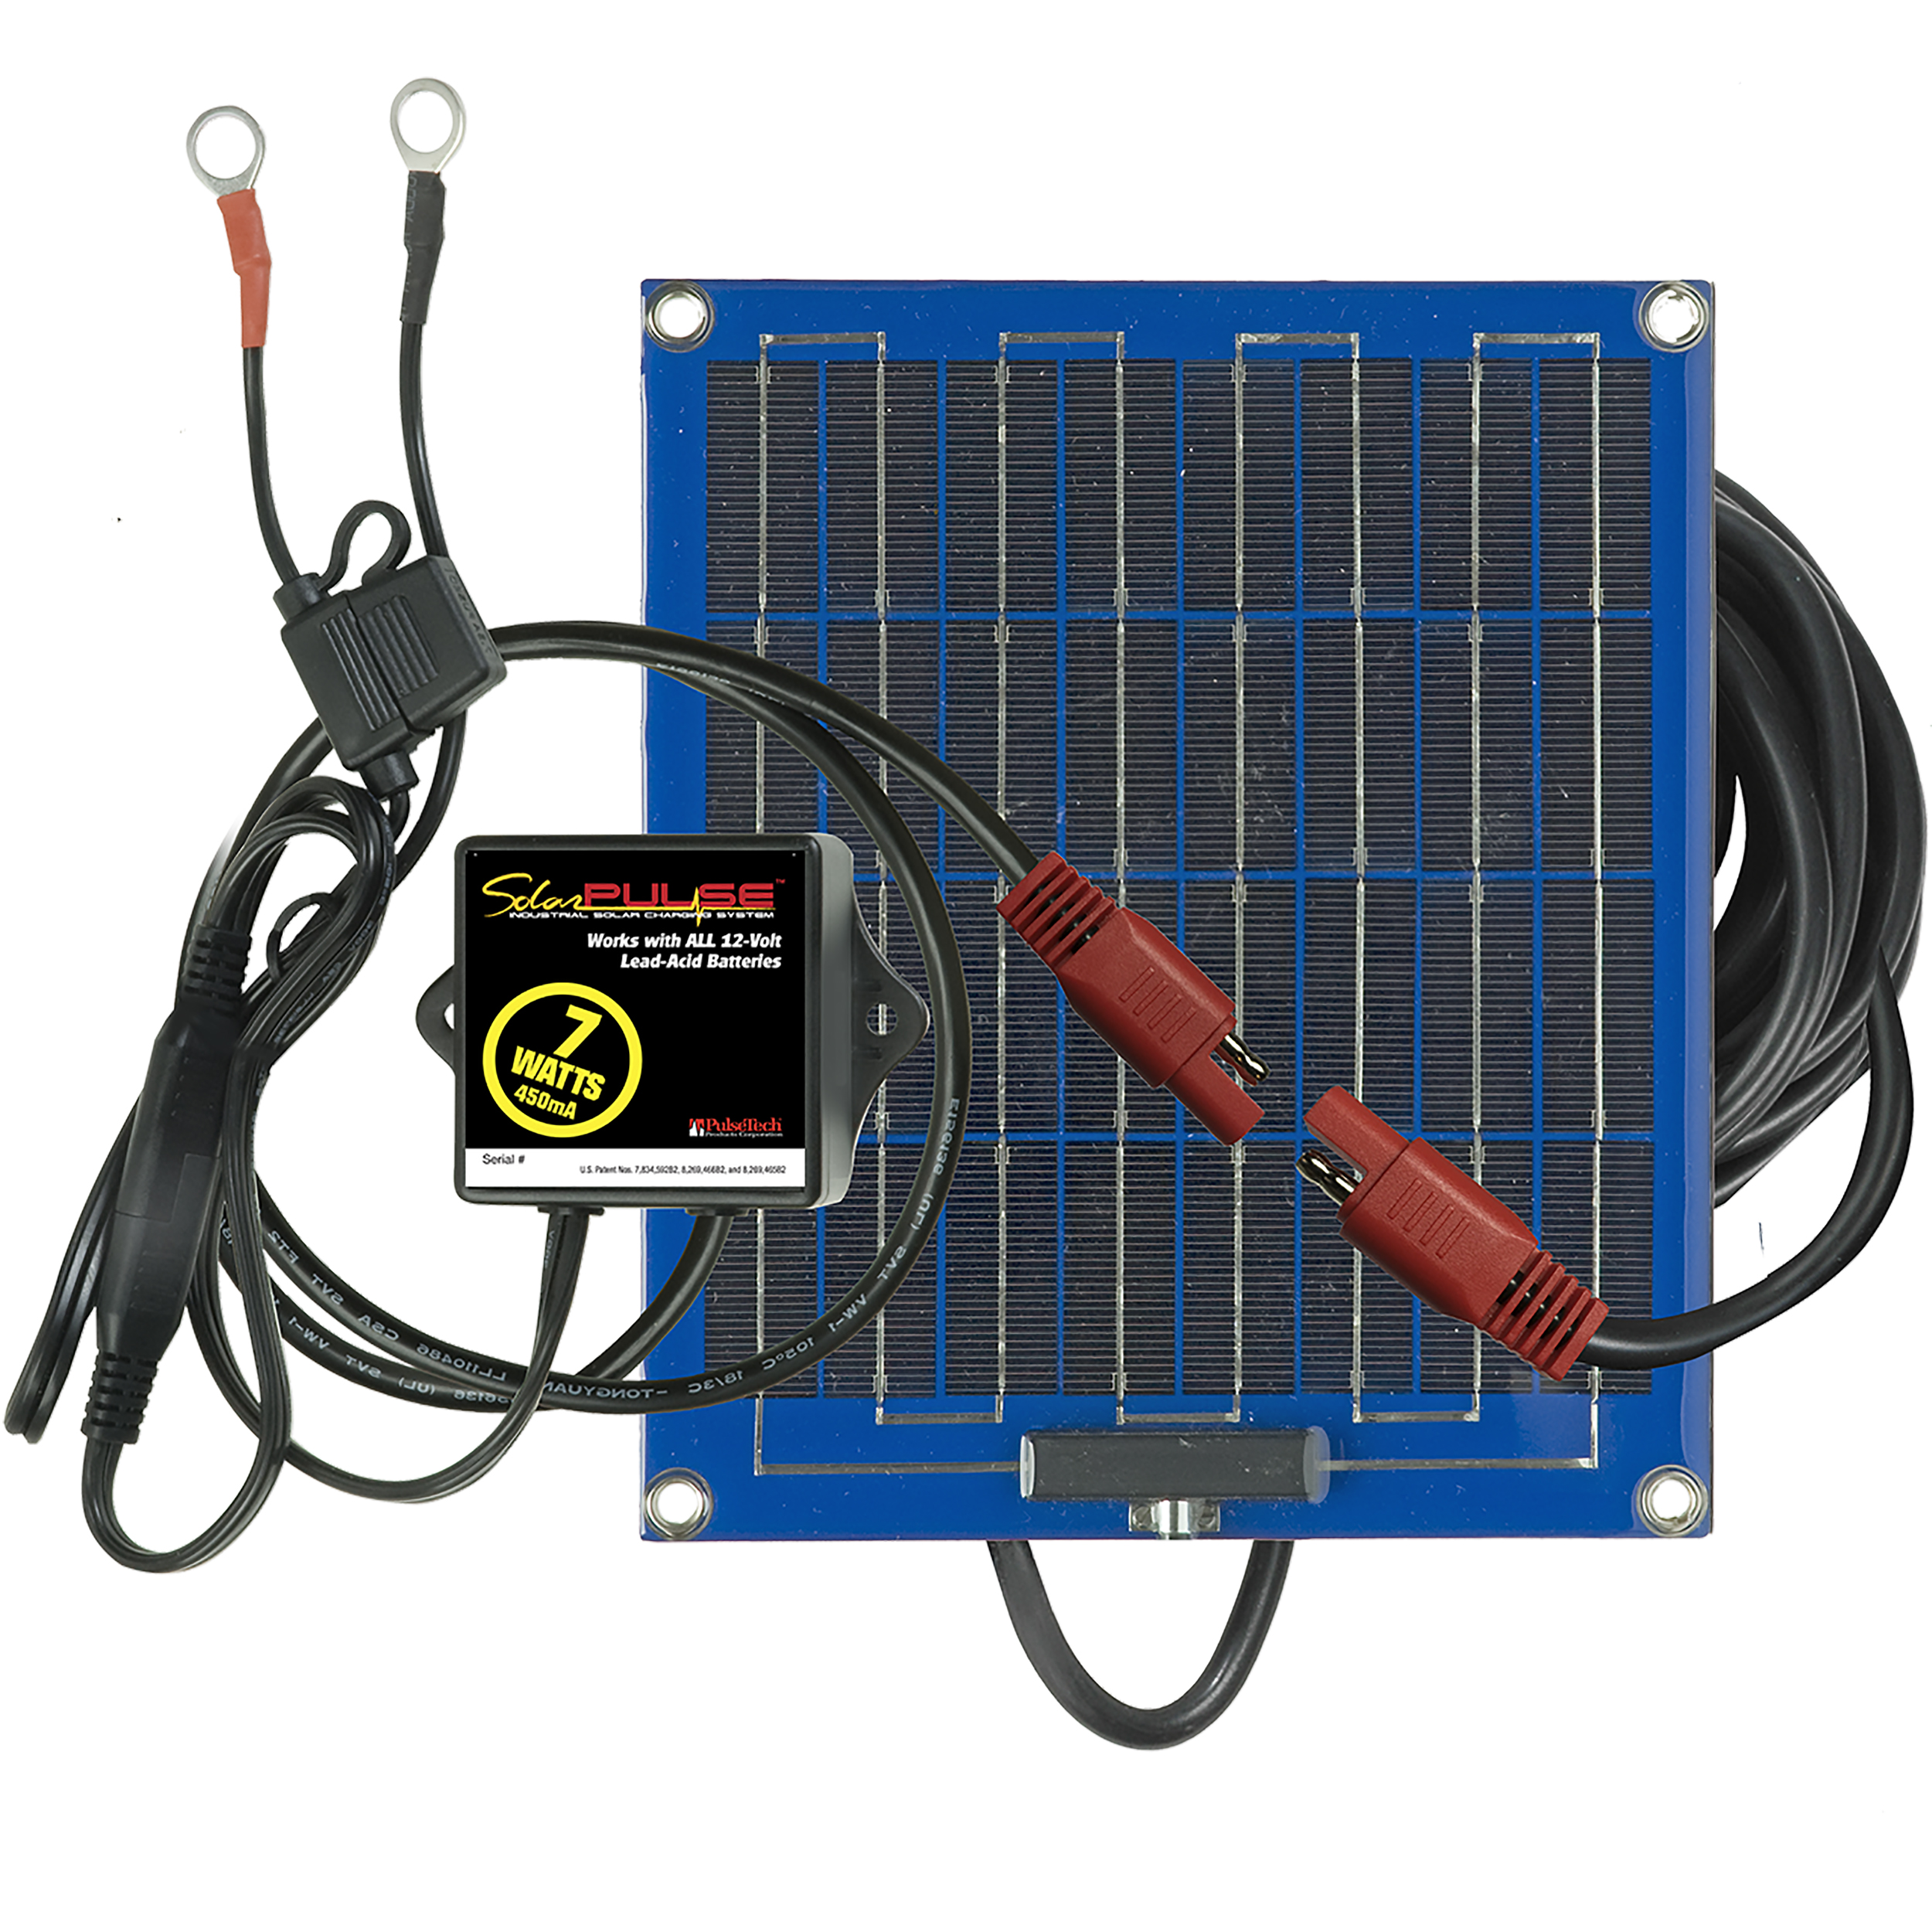 Solar panel for maintaining single and dual batteries